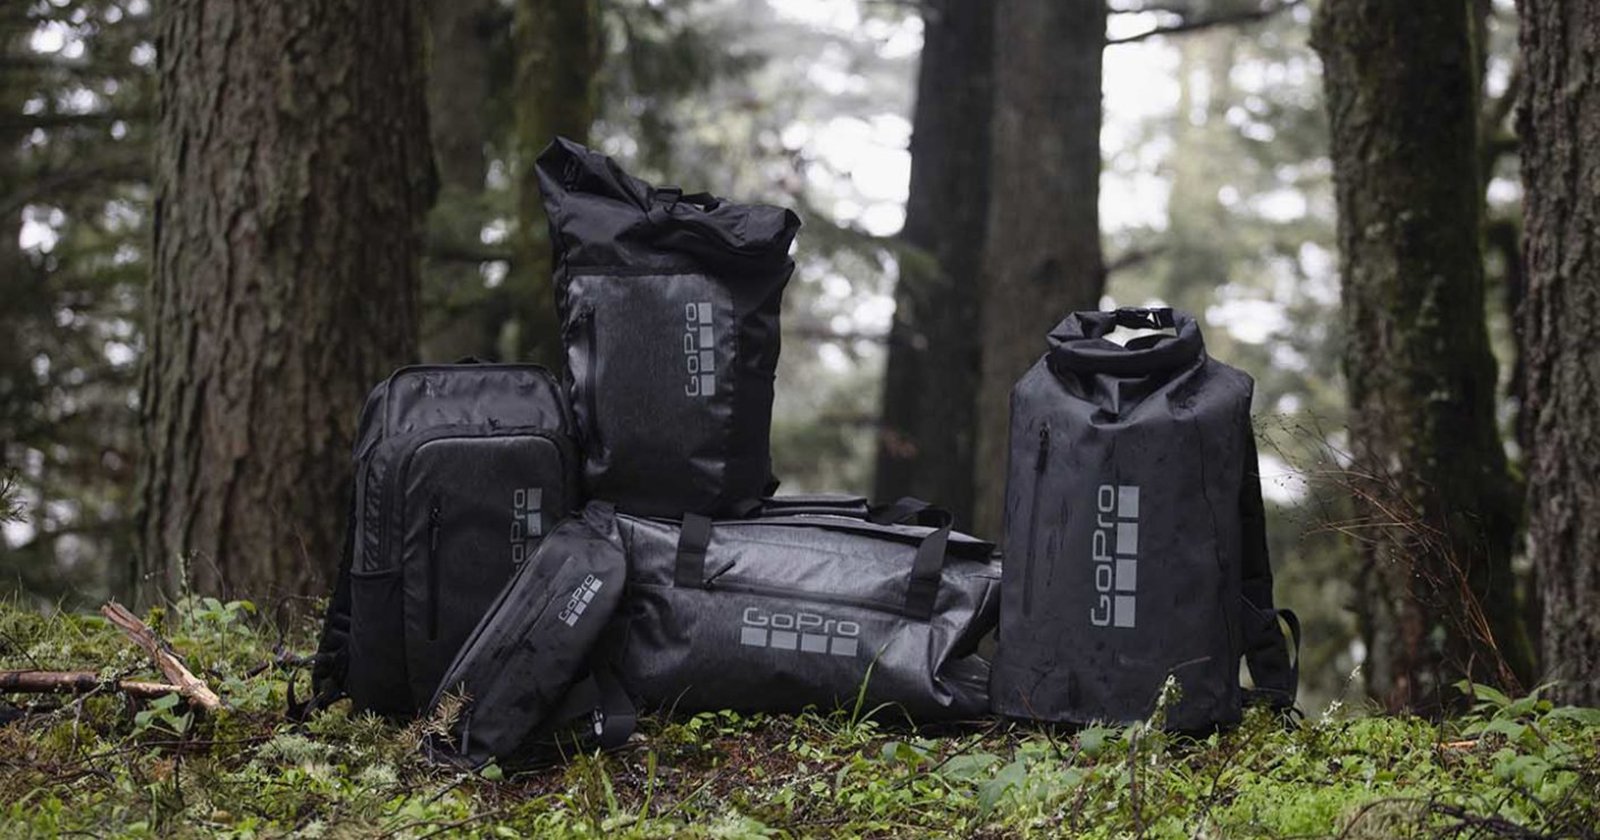 GoPro Now Sells 'Lifestyle Gear' Like Bags, Clothing, and